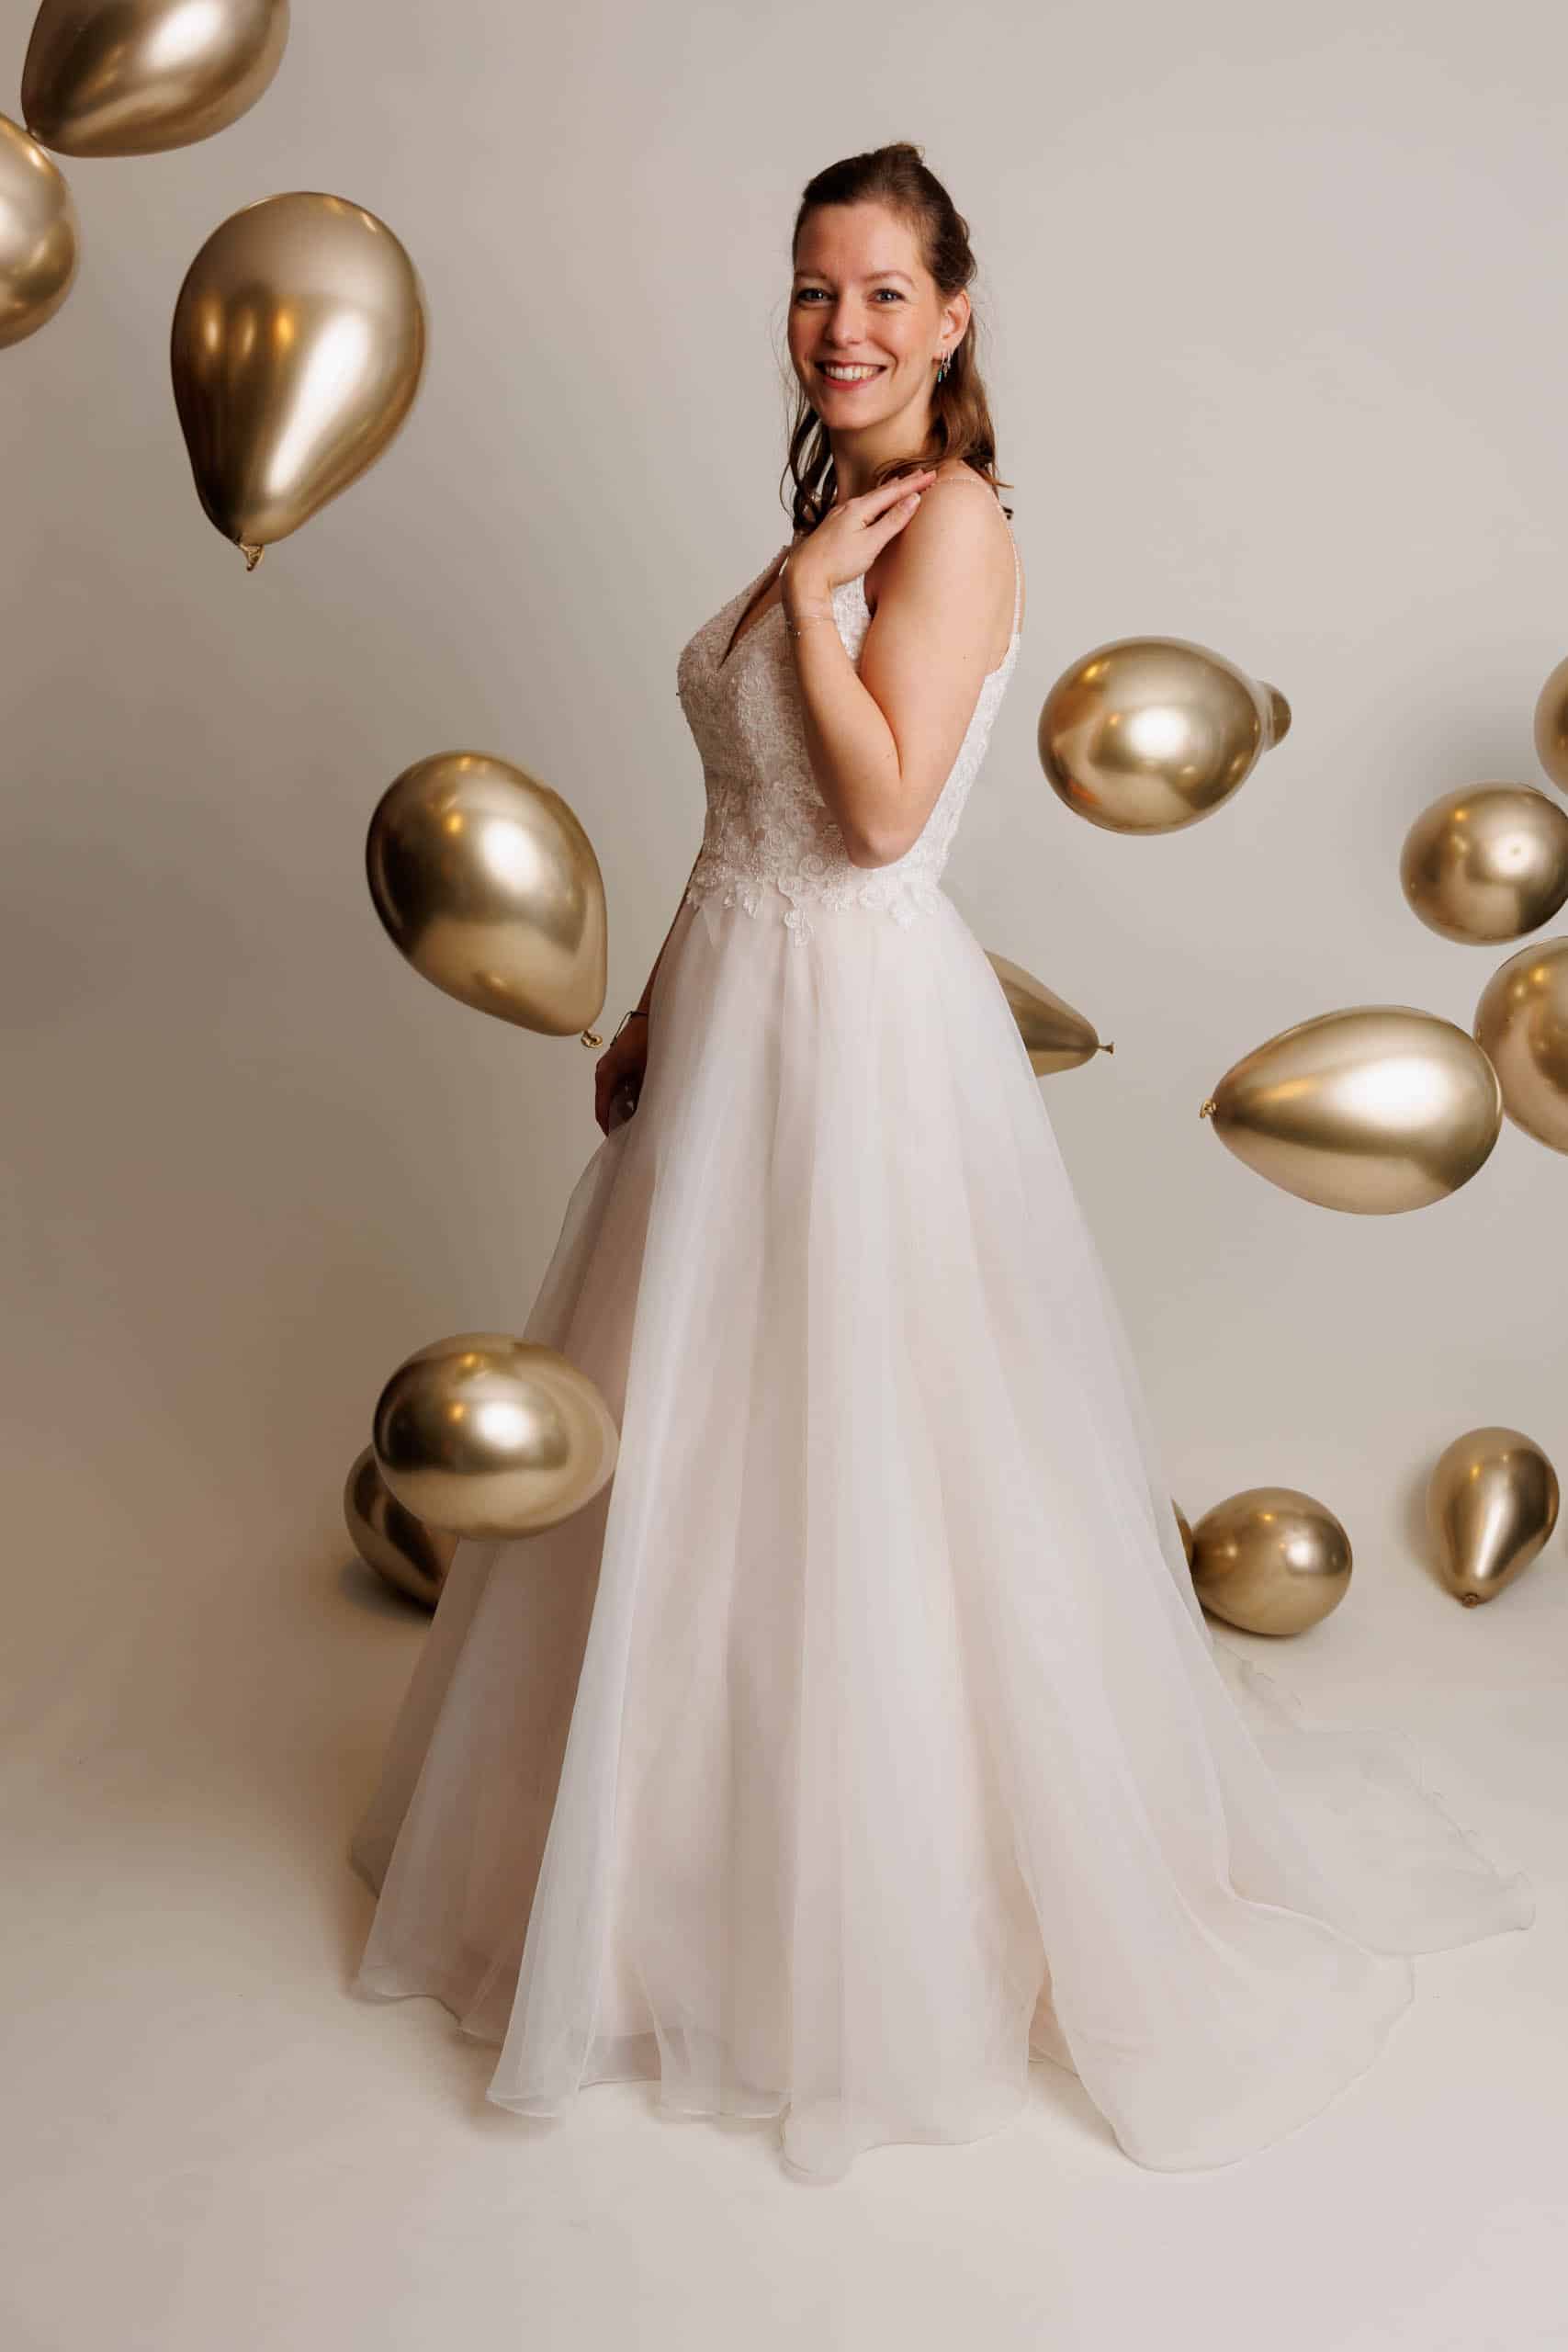 A woman in a wedding dress surrounded by golden balloons, enjoying the fun of trying on different wedding dresses.